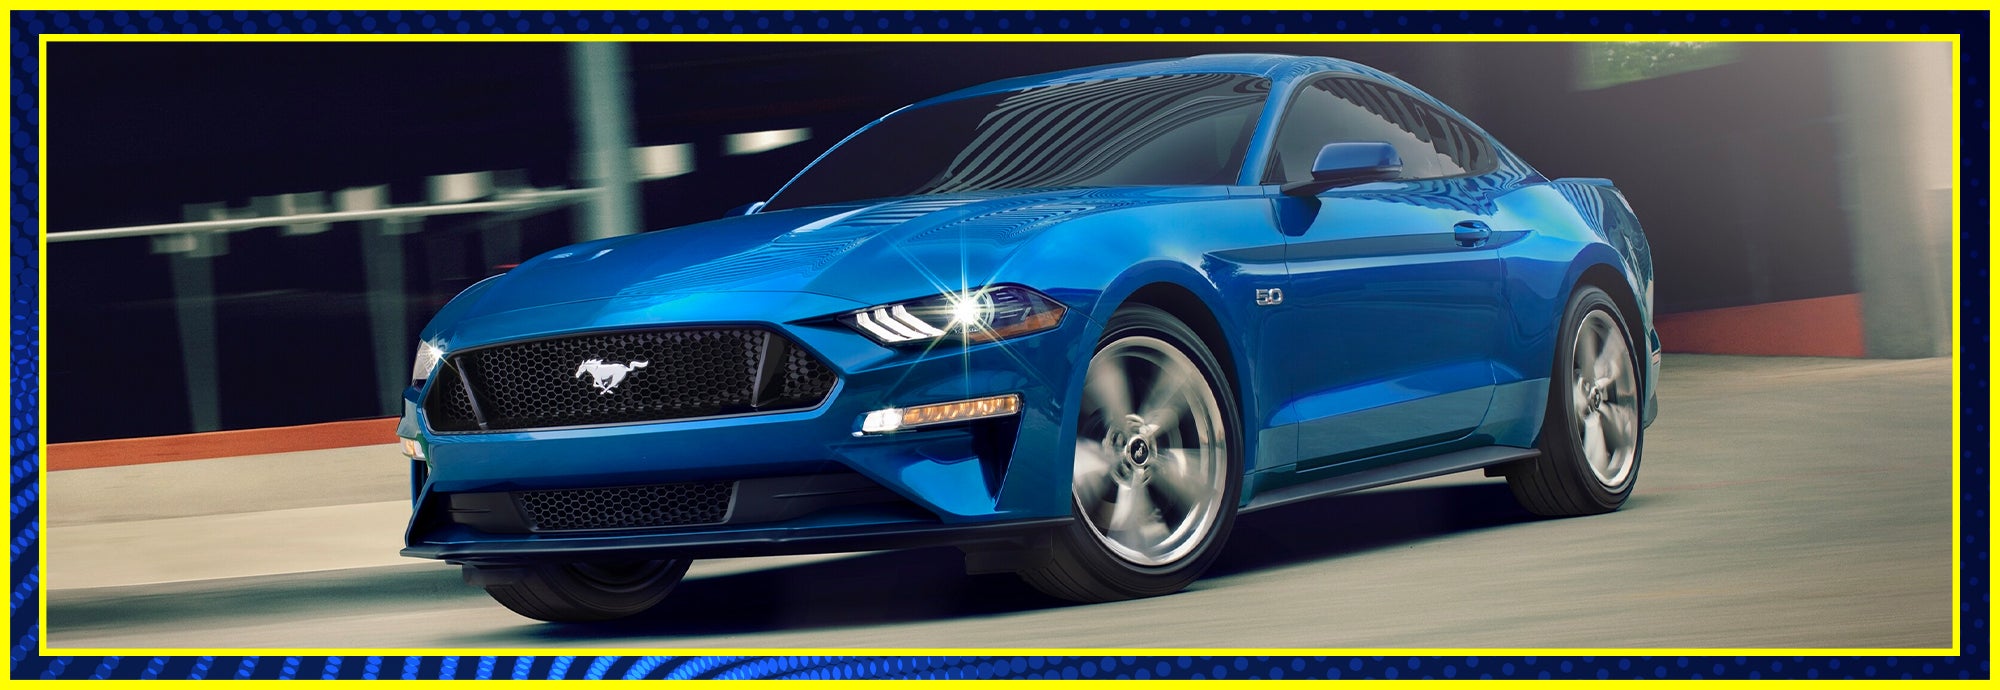 2021 Ford Mustang exterior